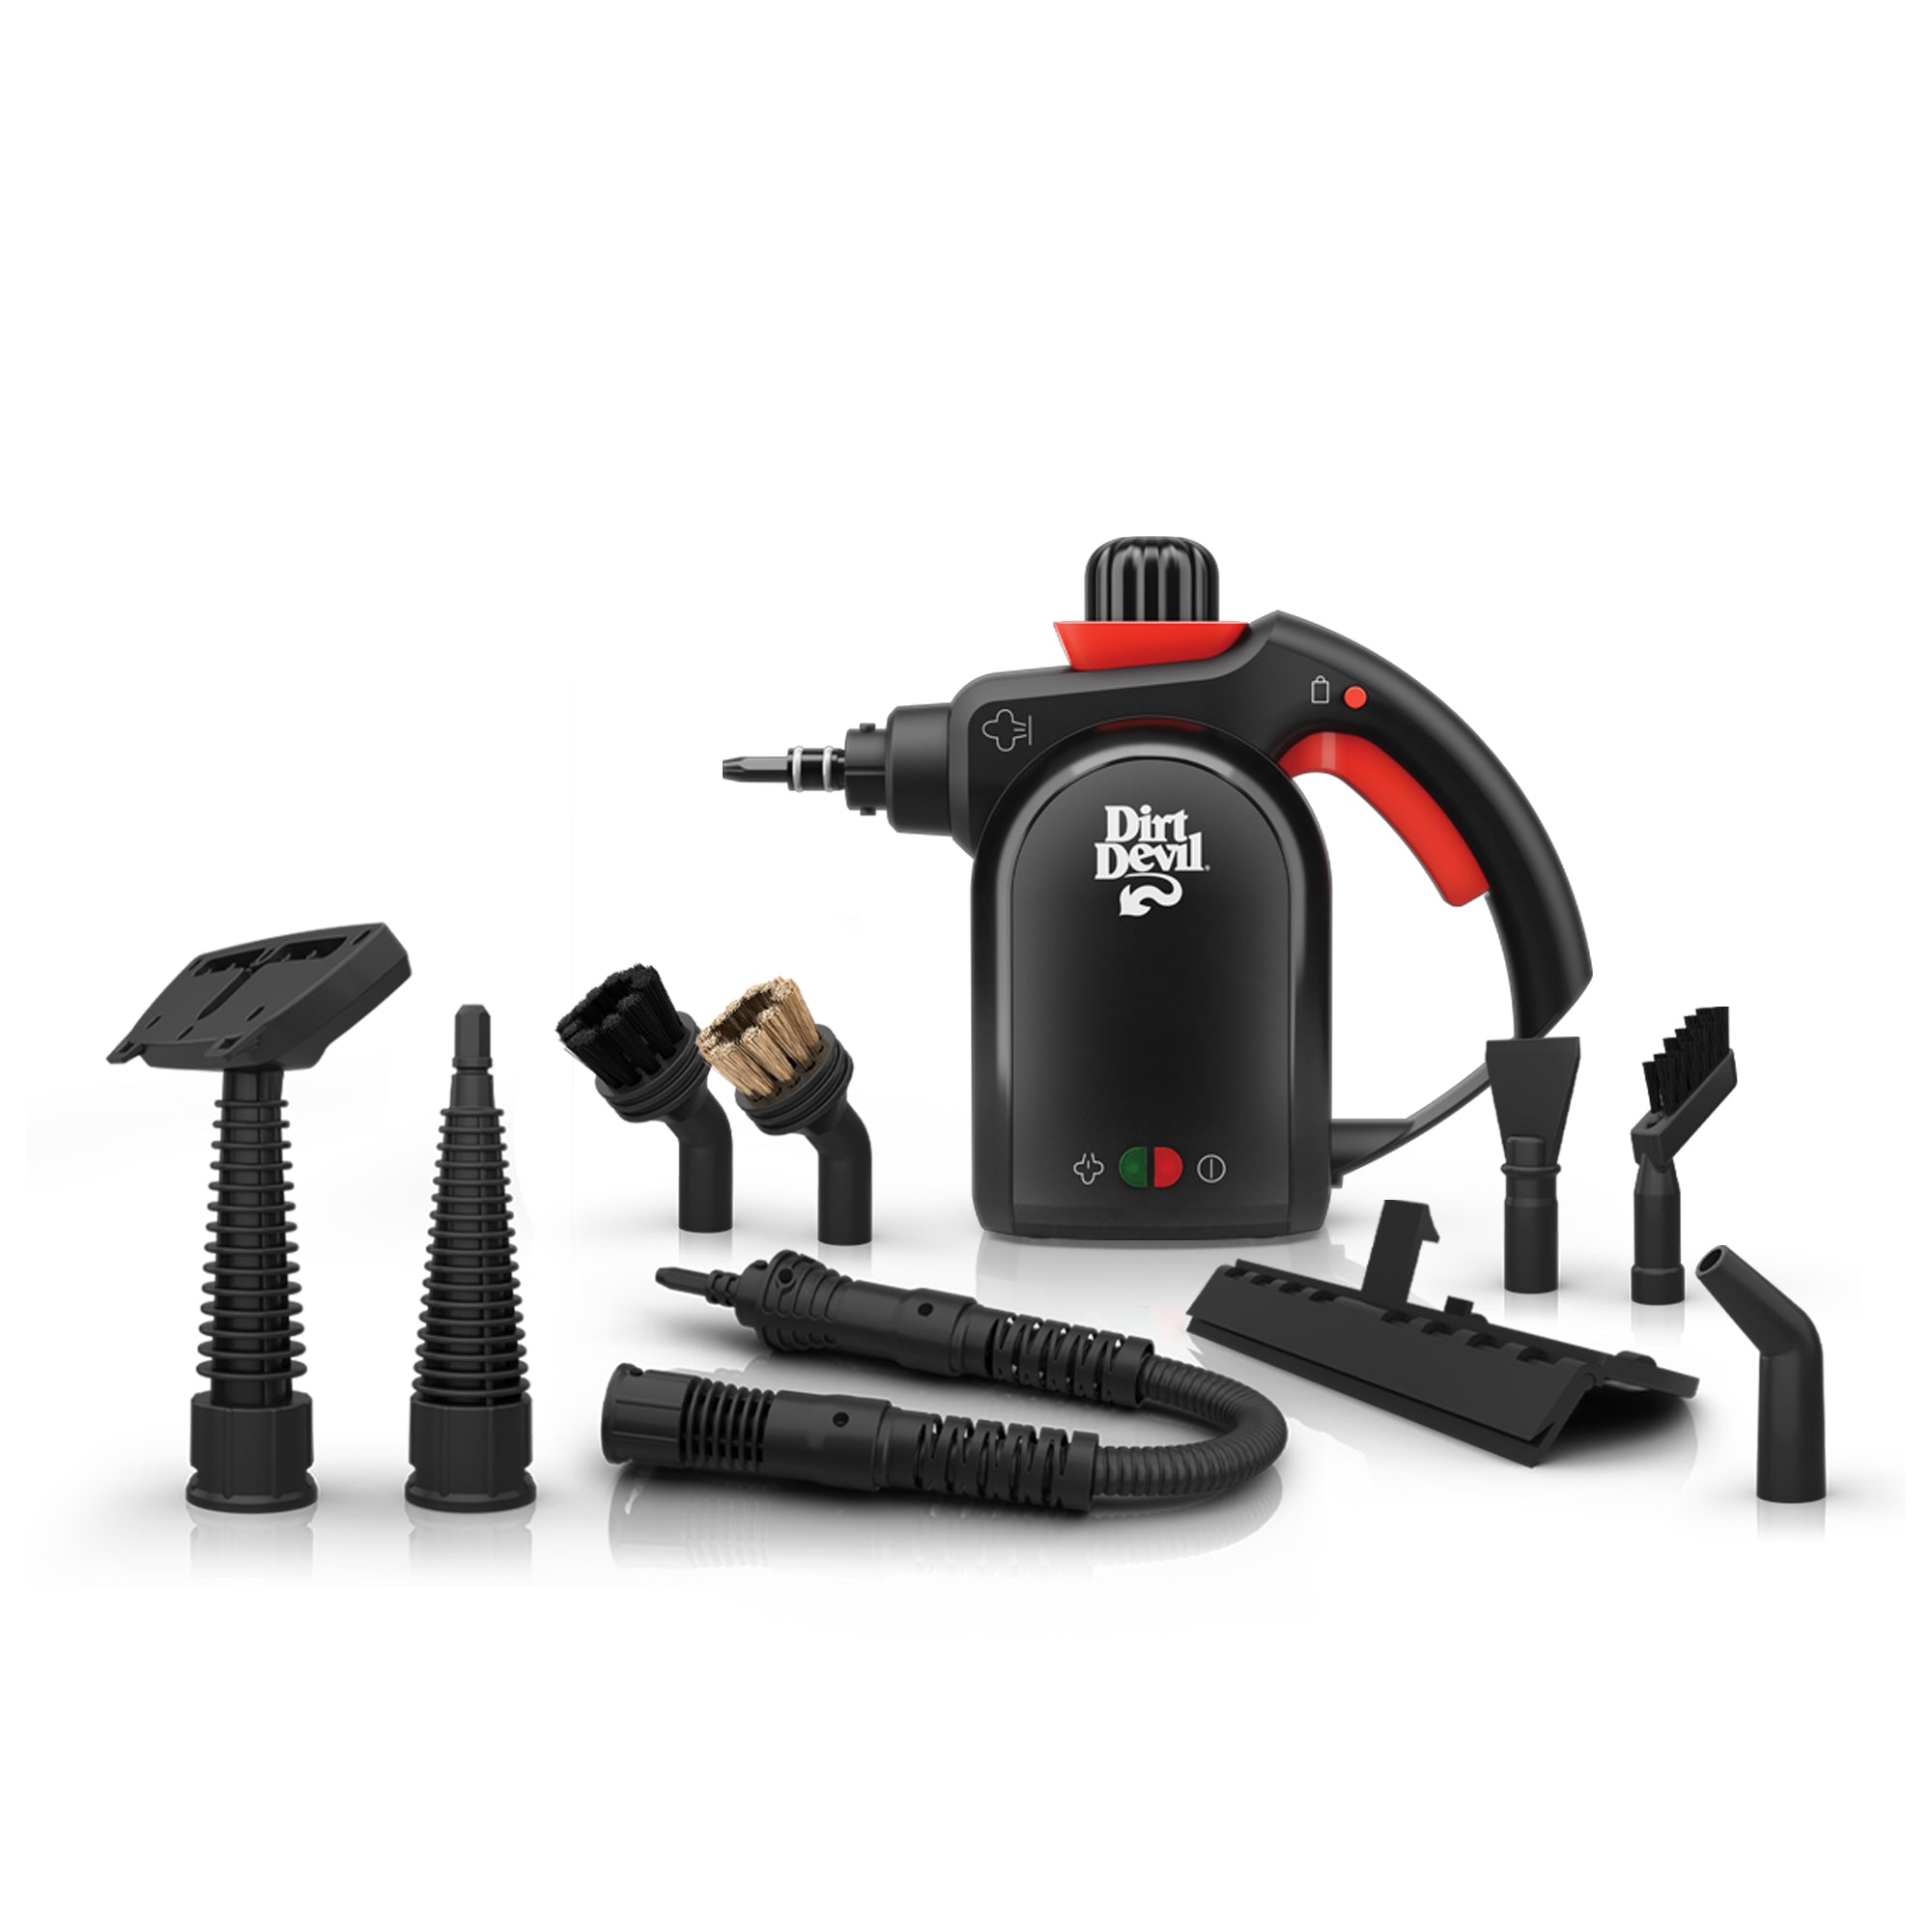 Vacuum Cleaners | Upright, Hand, Stick & Canister Vacuums | Dirt 